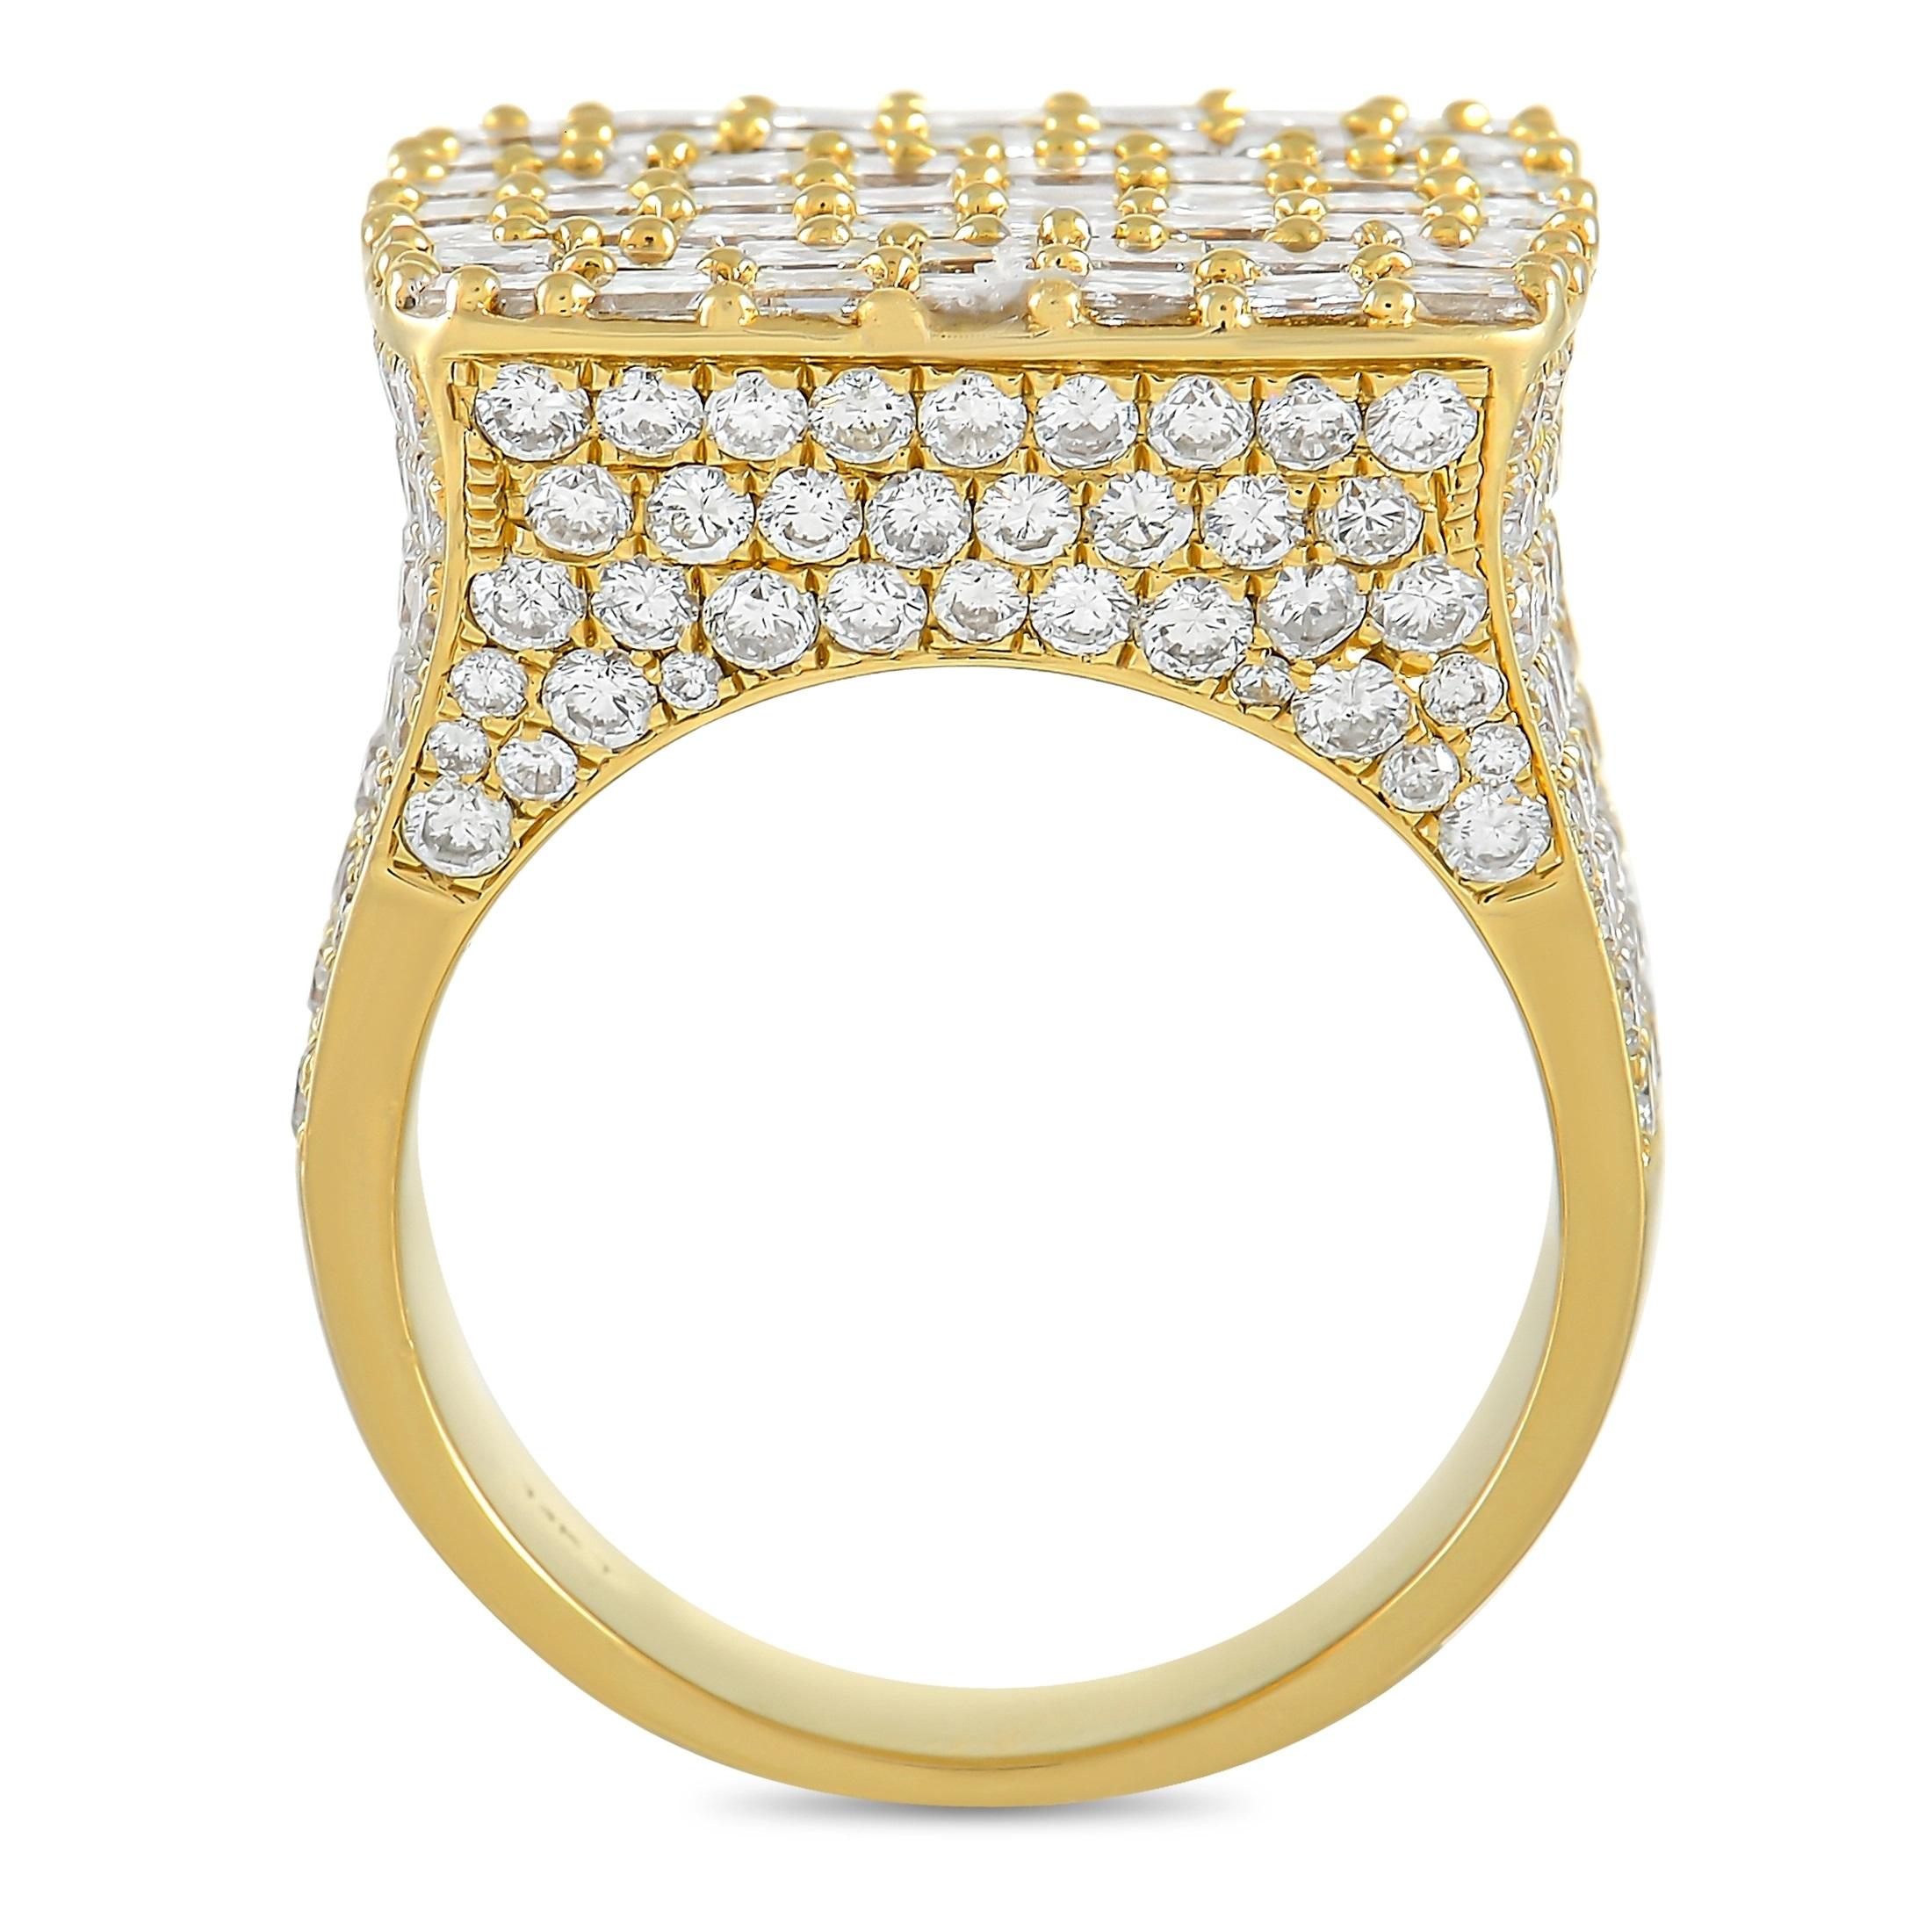 This bold, luxurious ring will continually command attention. Its statement-making setting includes an 10mm wide band and an 8mm top height. But it’s the glittering array of diamonds totaling 10.49 carats on the top and sides that make it impossible